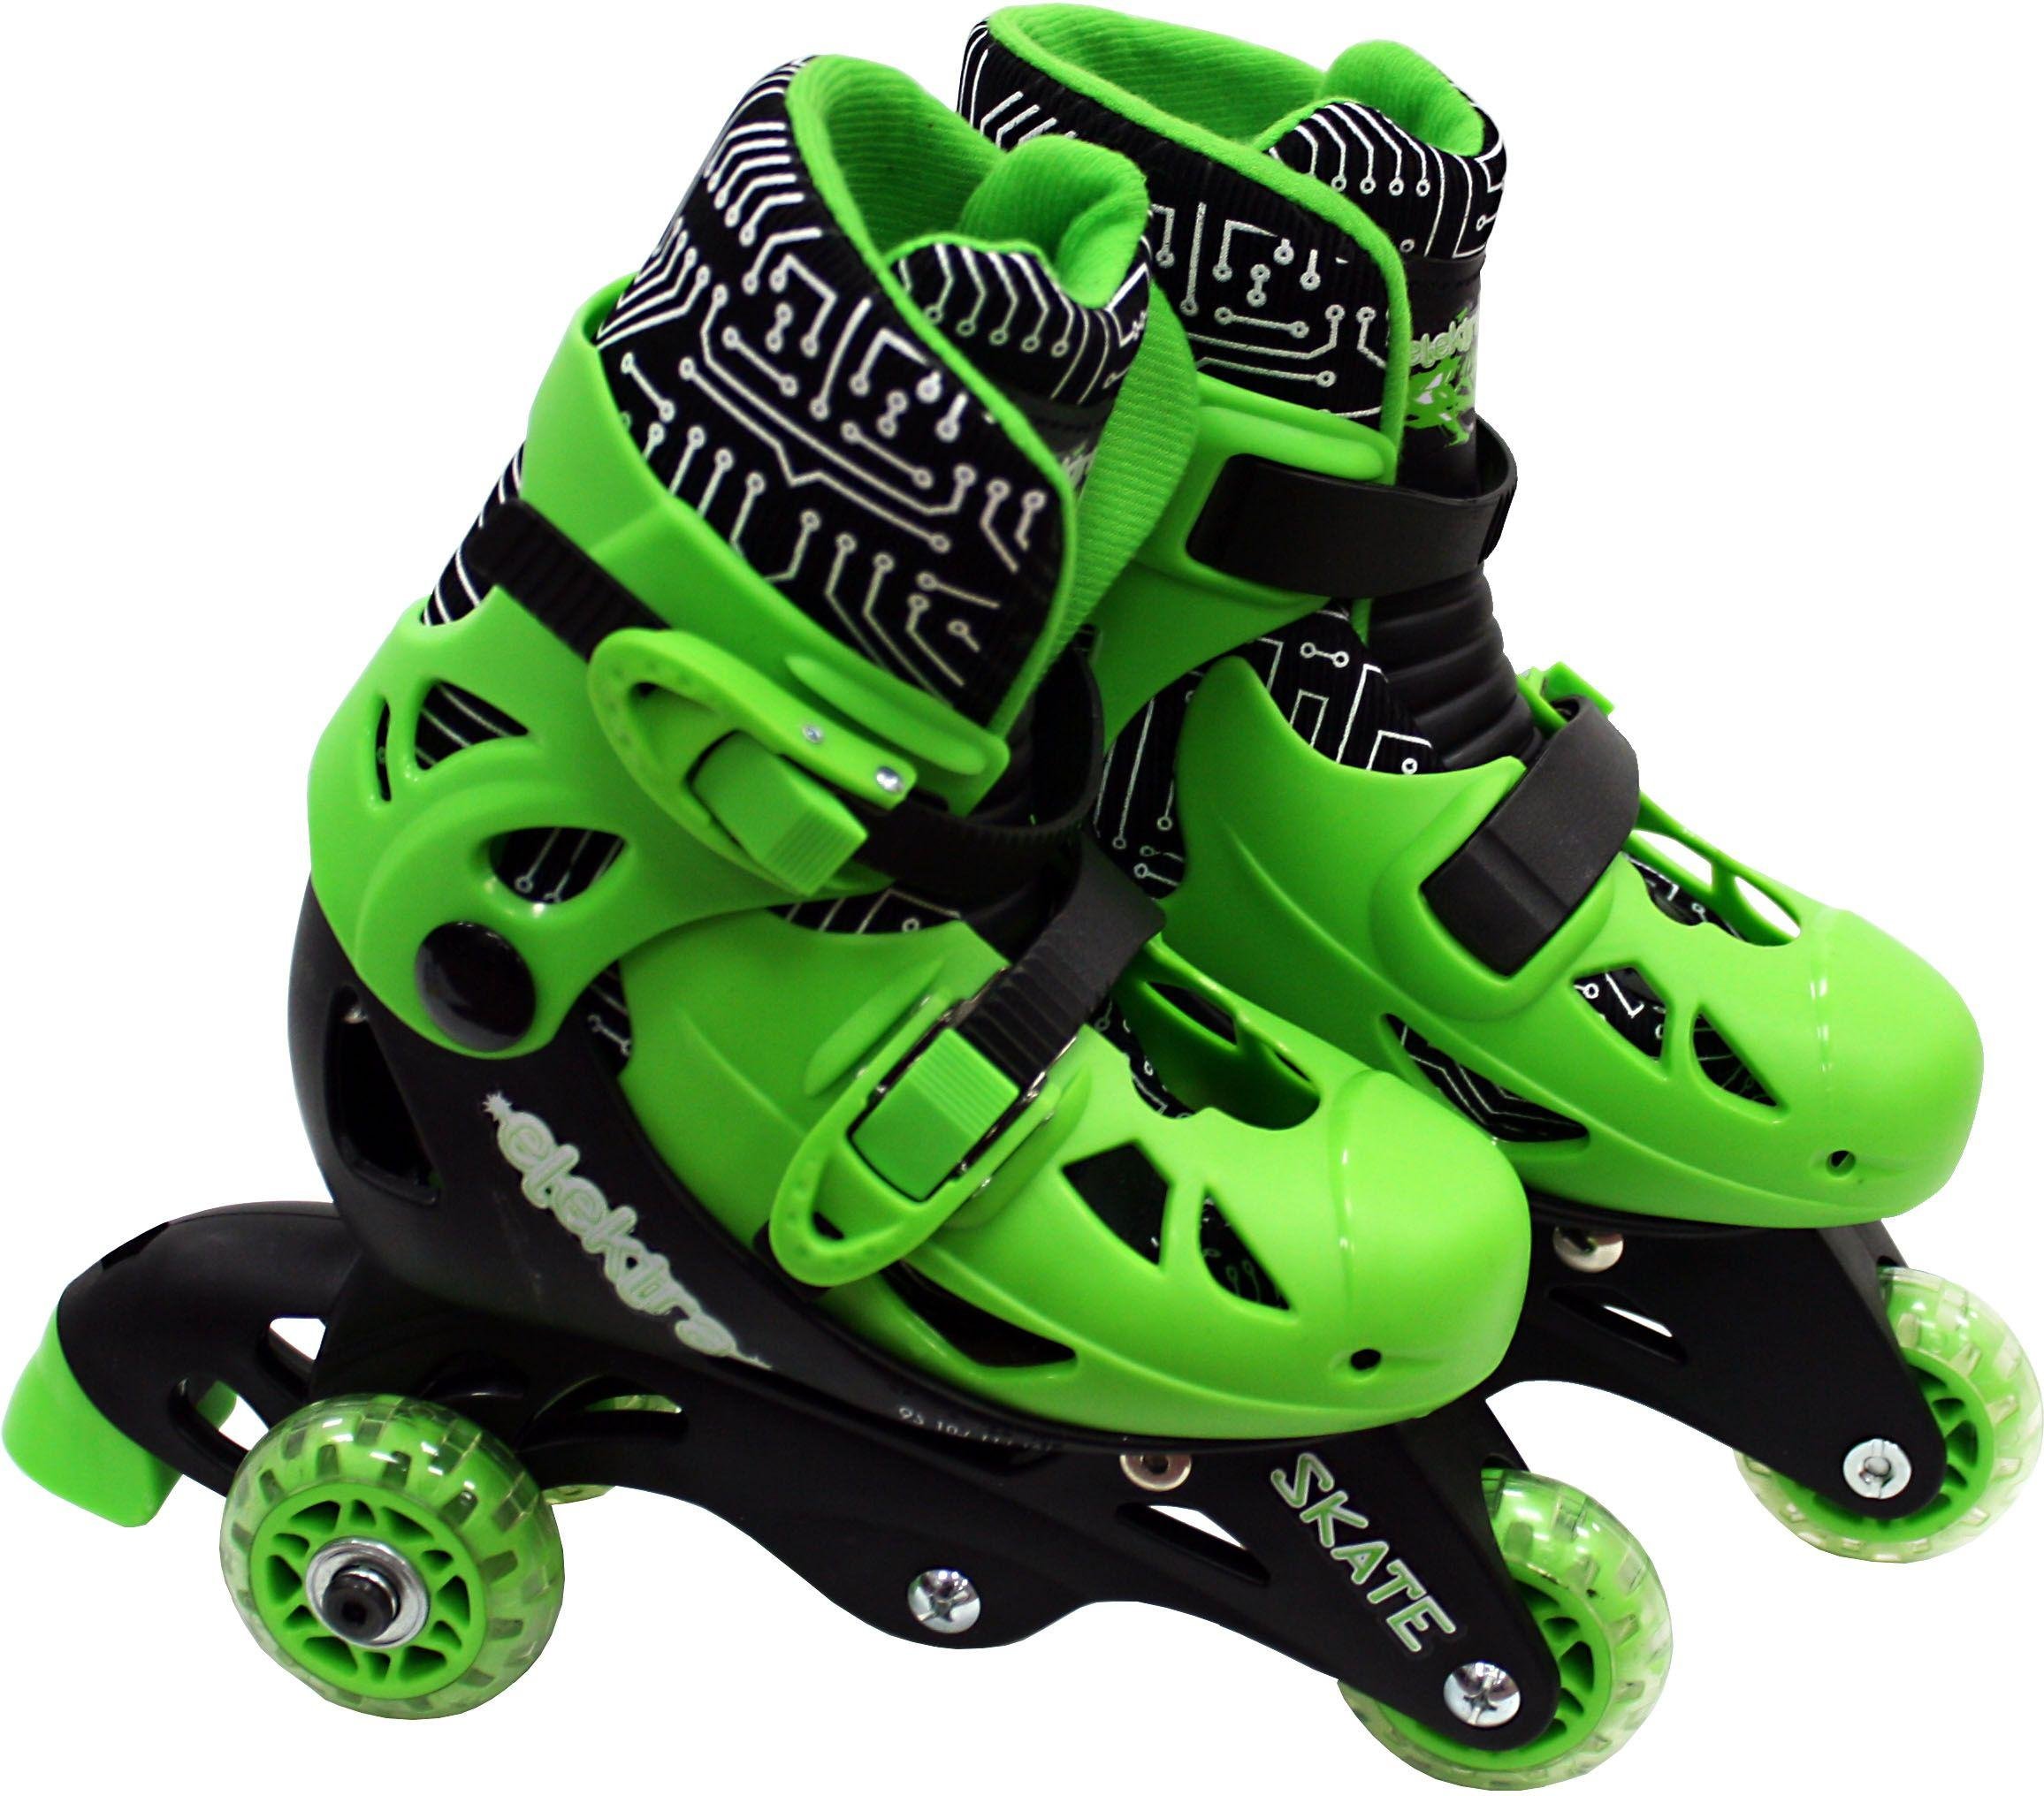 Elektra Tri to In Line Boot Skates review